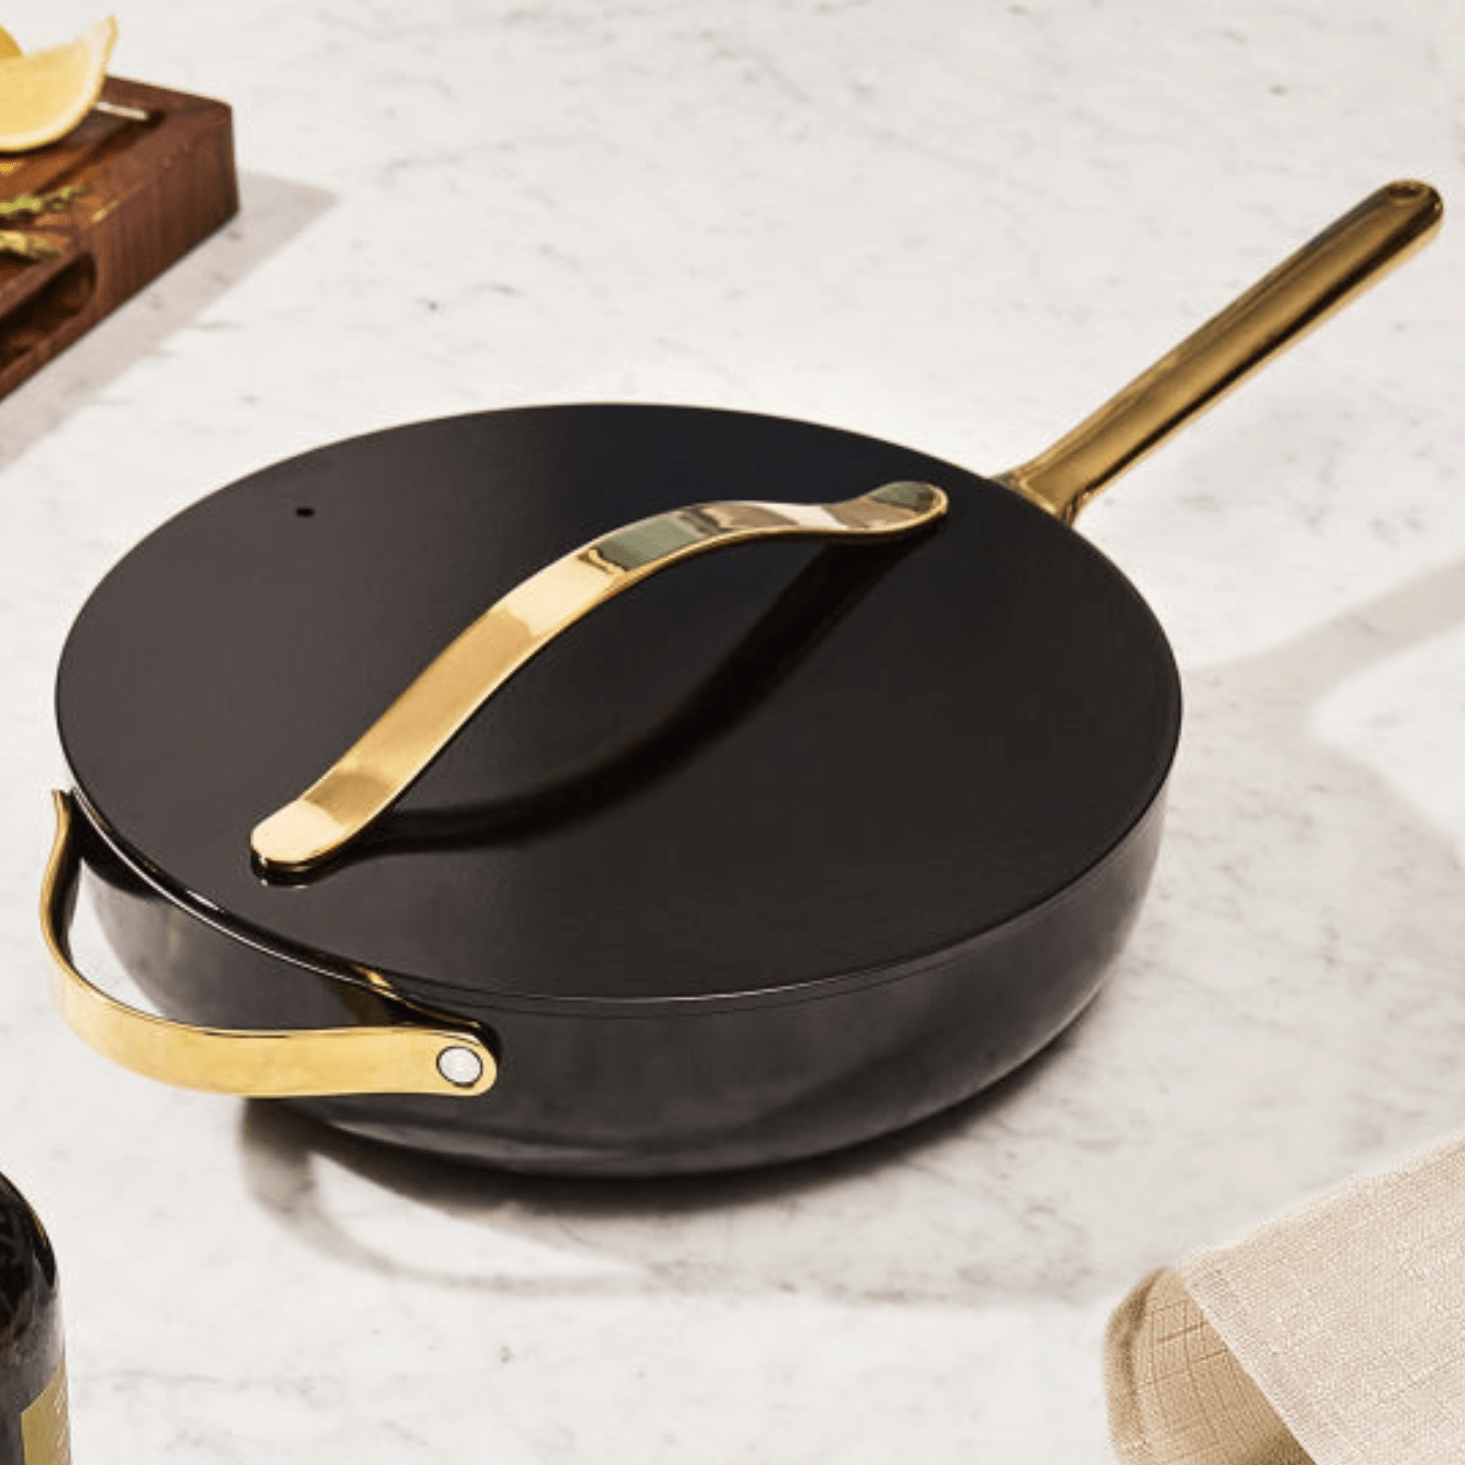 Caraway sale: This rose-hued cookware set is 20% off ahead of